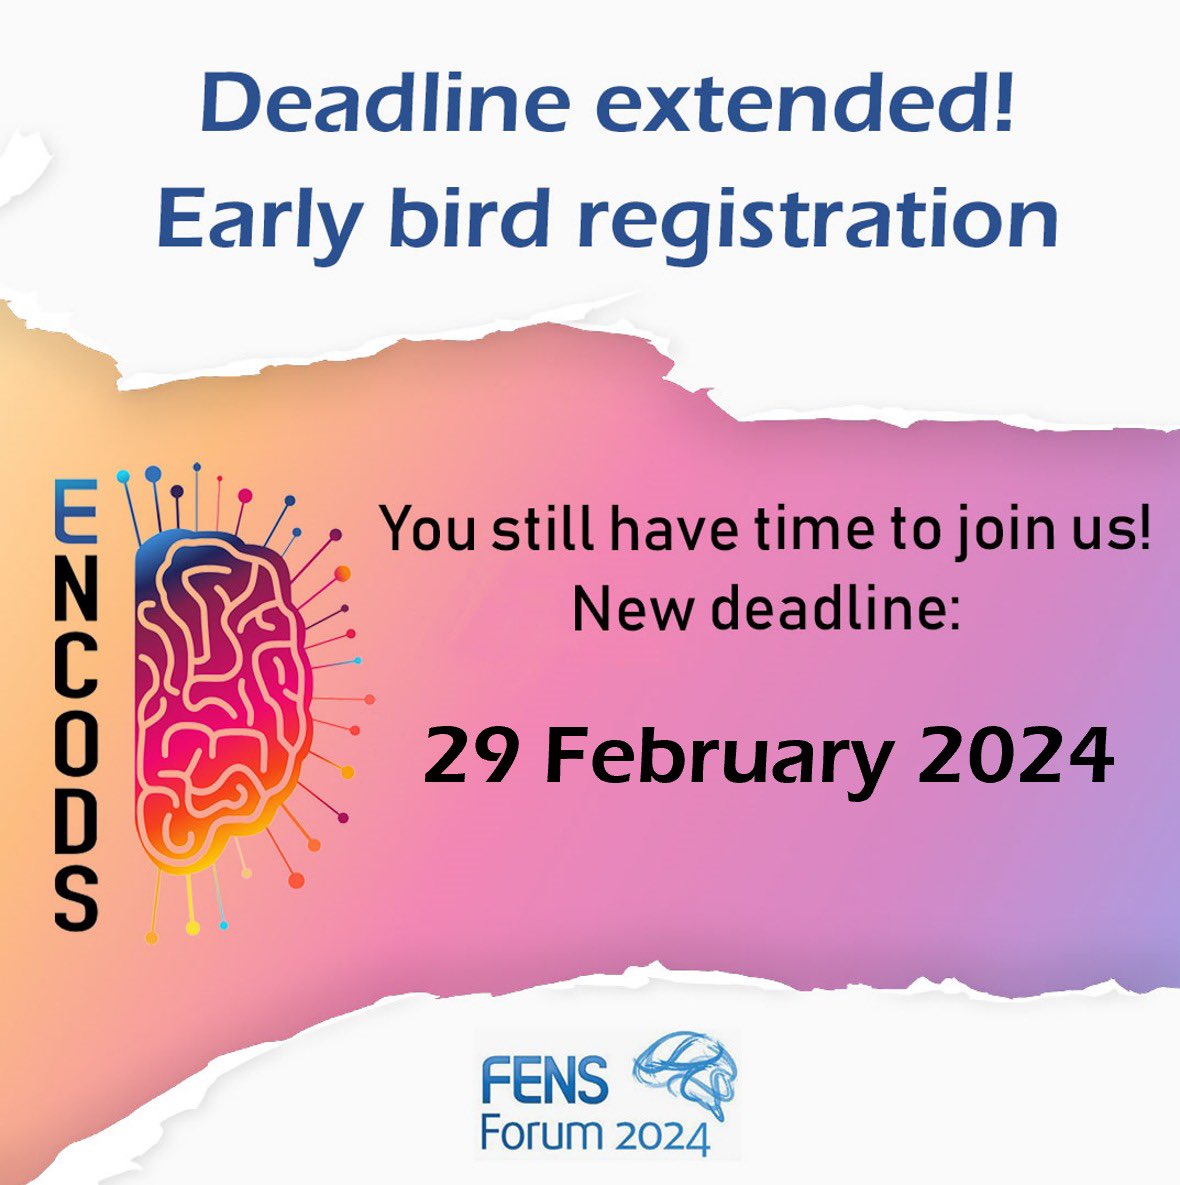 🚨 Attention PhD students in neuroscience! The early bird registration deadline for ENCODS 2024 has been extended until 29 February 2024! Don’t miss out on discounted rates. Secure your spot now! 🧠🐦 #ENCODS2024 #conference #EarlyBirdDeadline #fens2024 #phdstudent @FENSorg